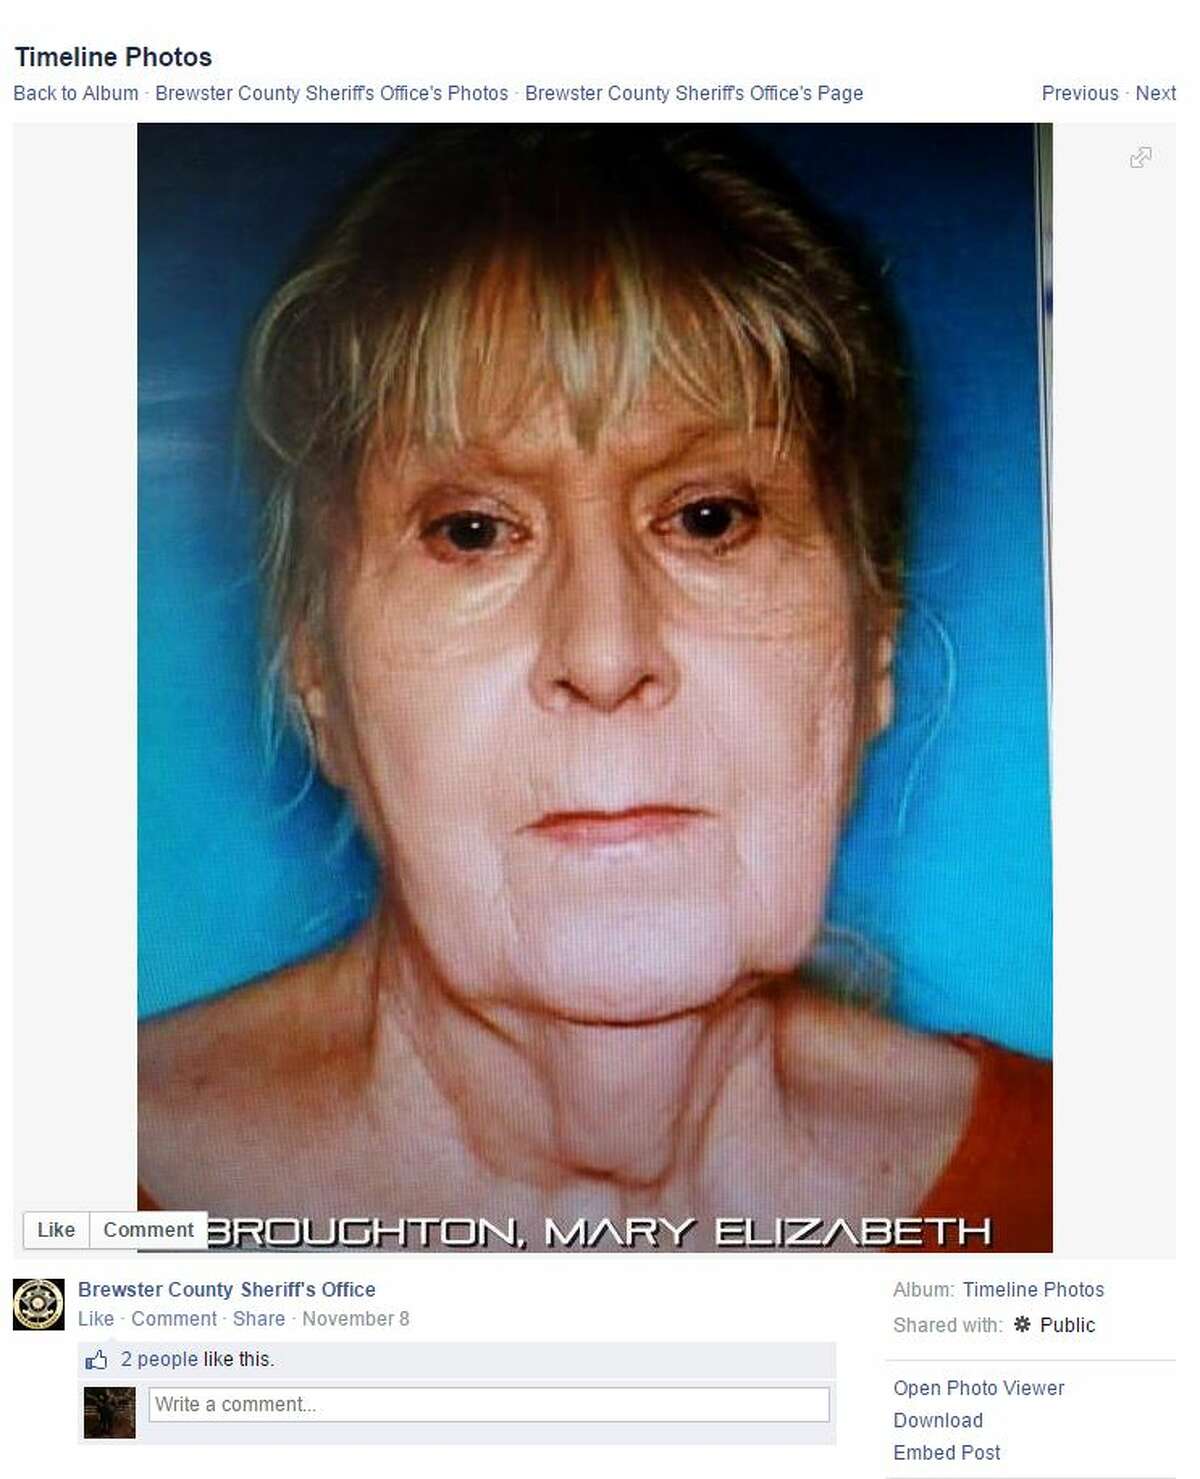 Police have found the body of a missing Terlingua woman whose daughter was sentenced to 10 years in prison for hiding her father's body in a Kentucky storage unit for 24 years and using his Social Security benefits. Officers found Judith Broughton's remains in a blue tarp hidden underneath the kitchen floor in her daughter Mary Broughton's house, NewsWest9.com reported Wednesday.